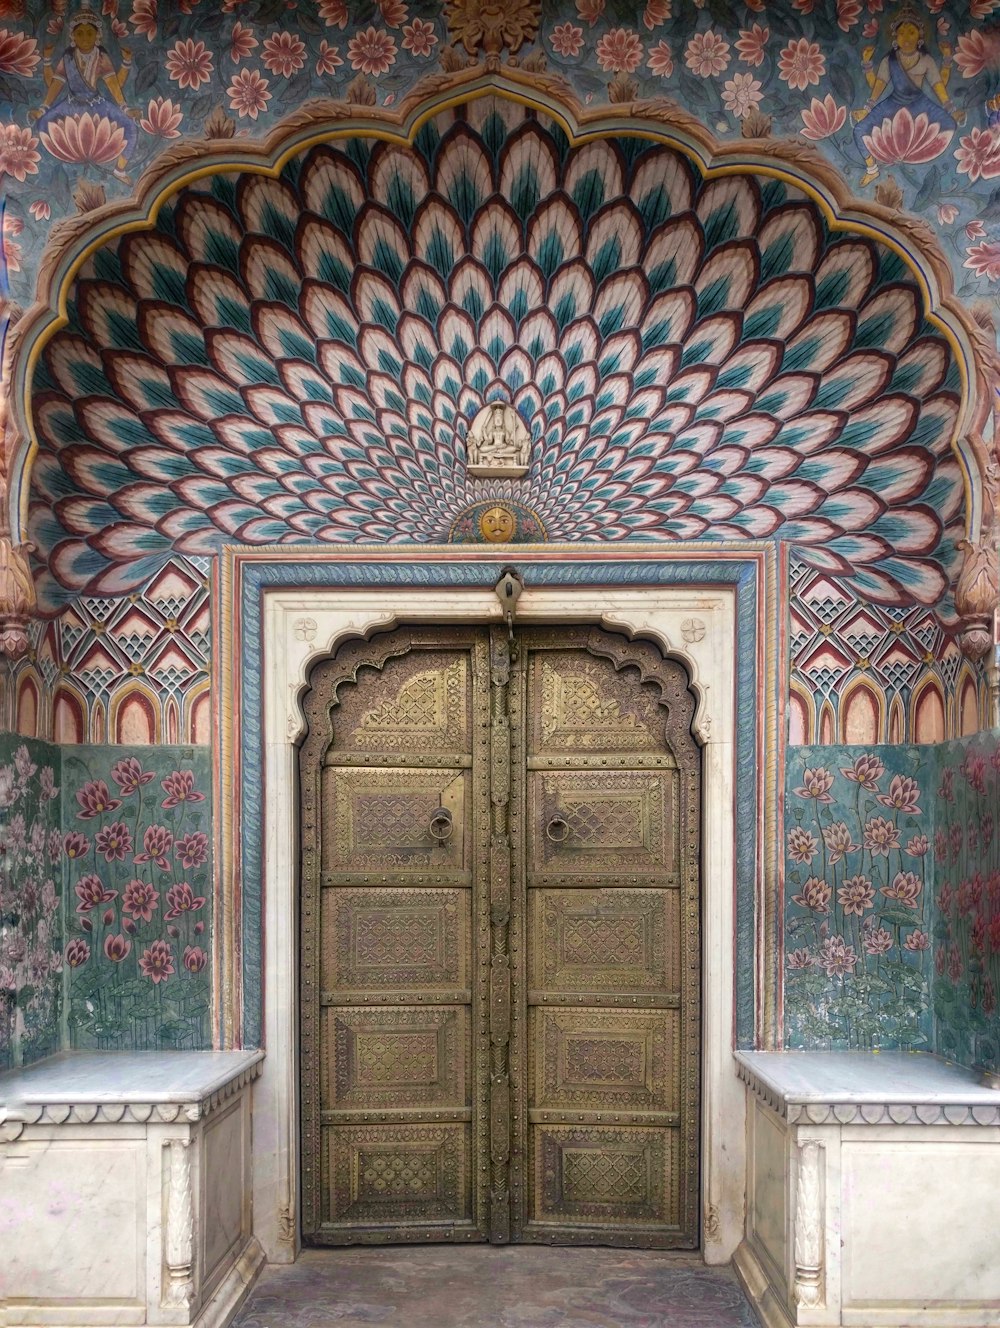 an ornate doorway with a bench in front of it